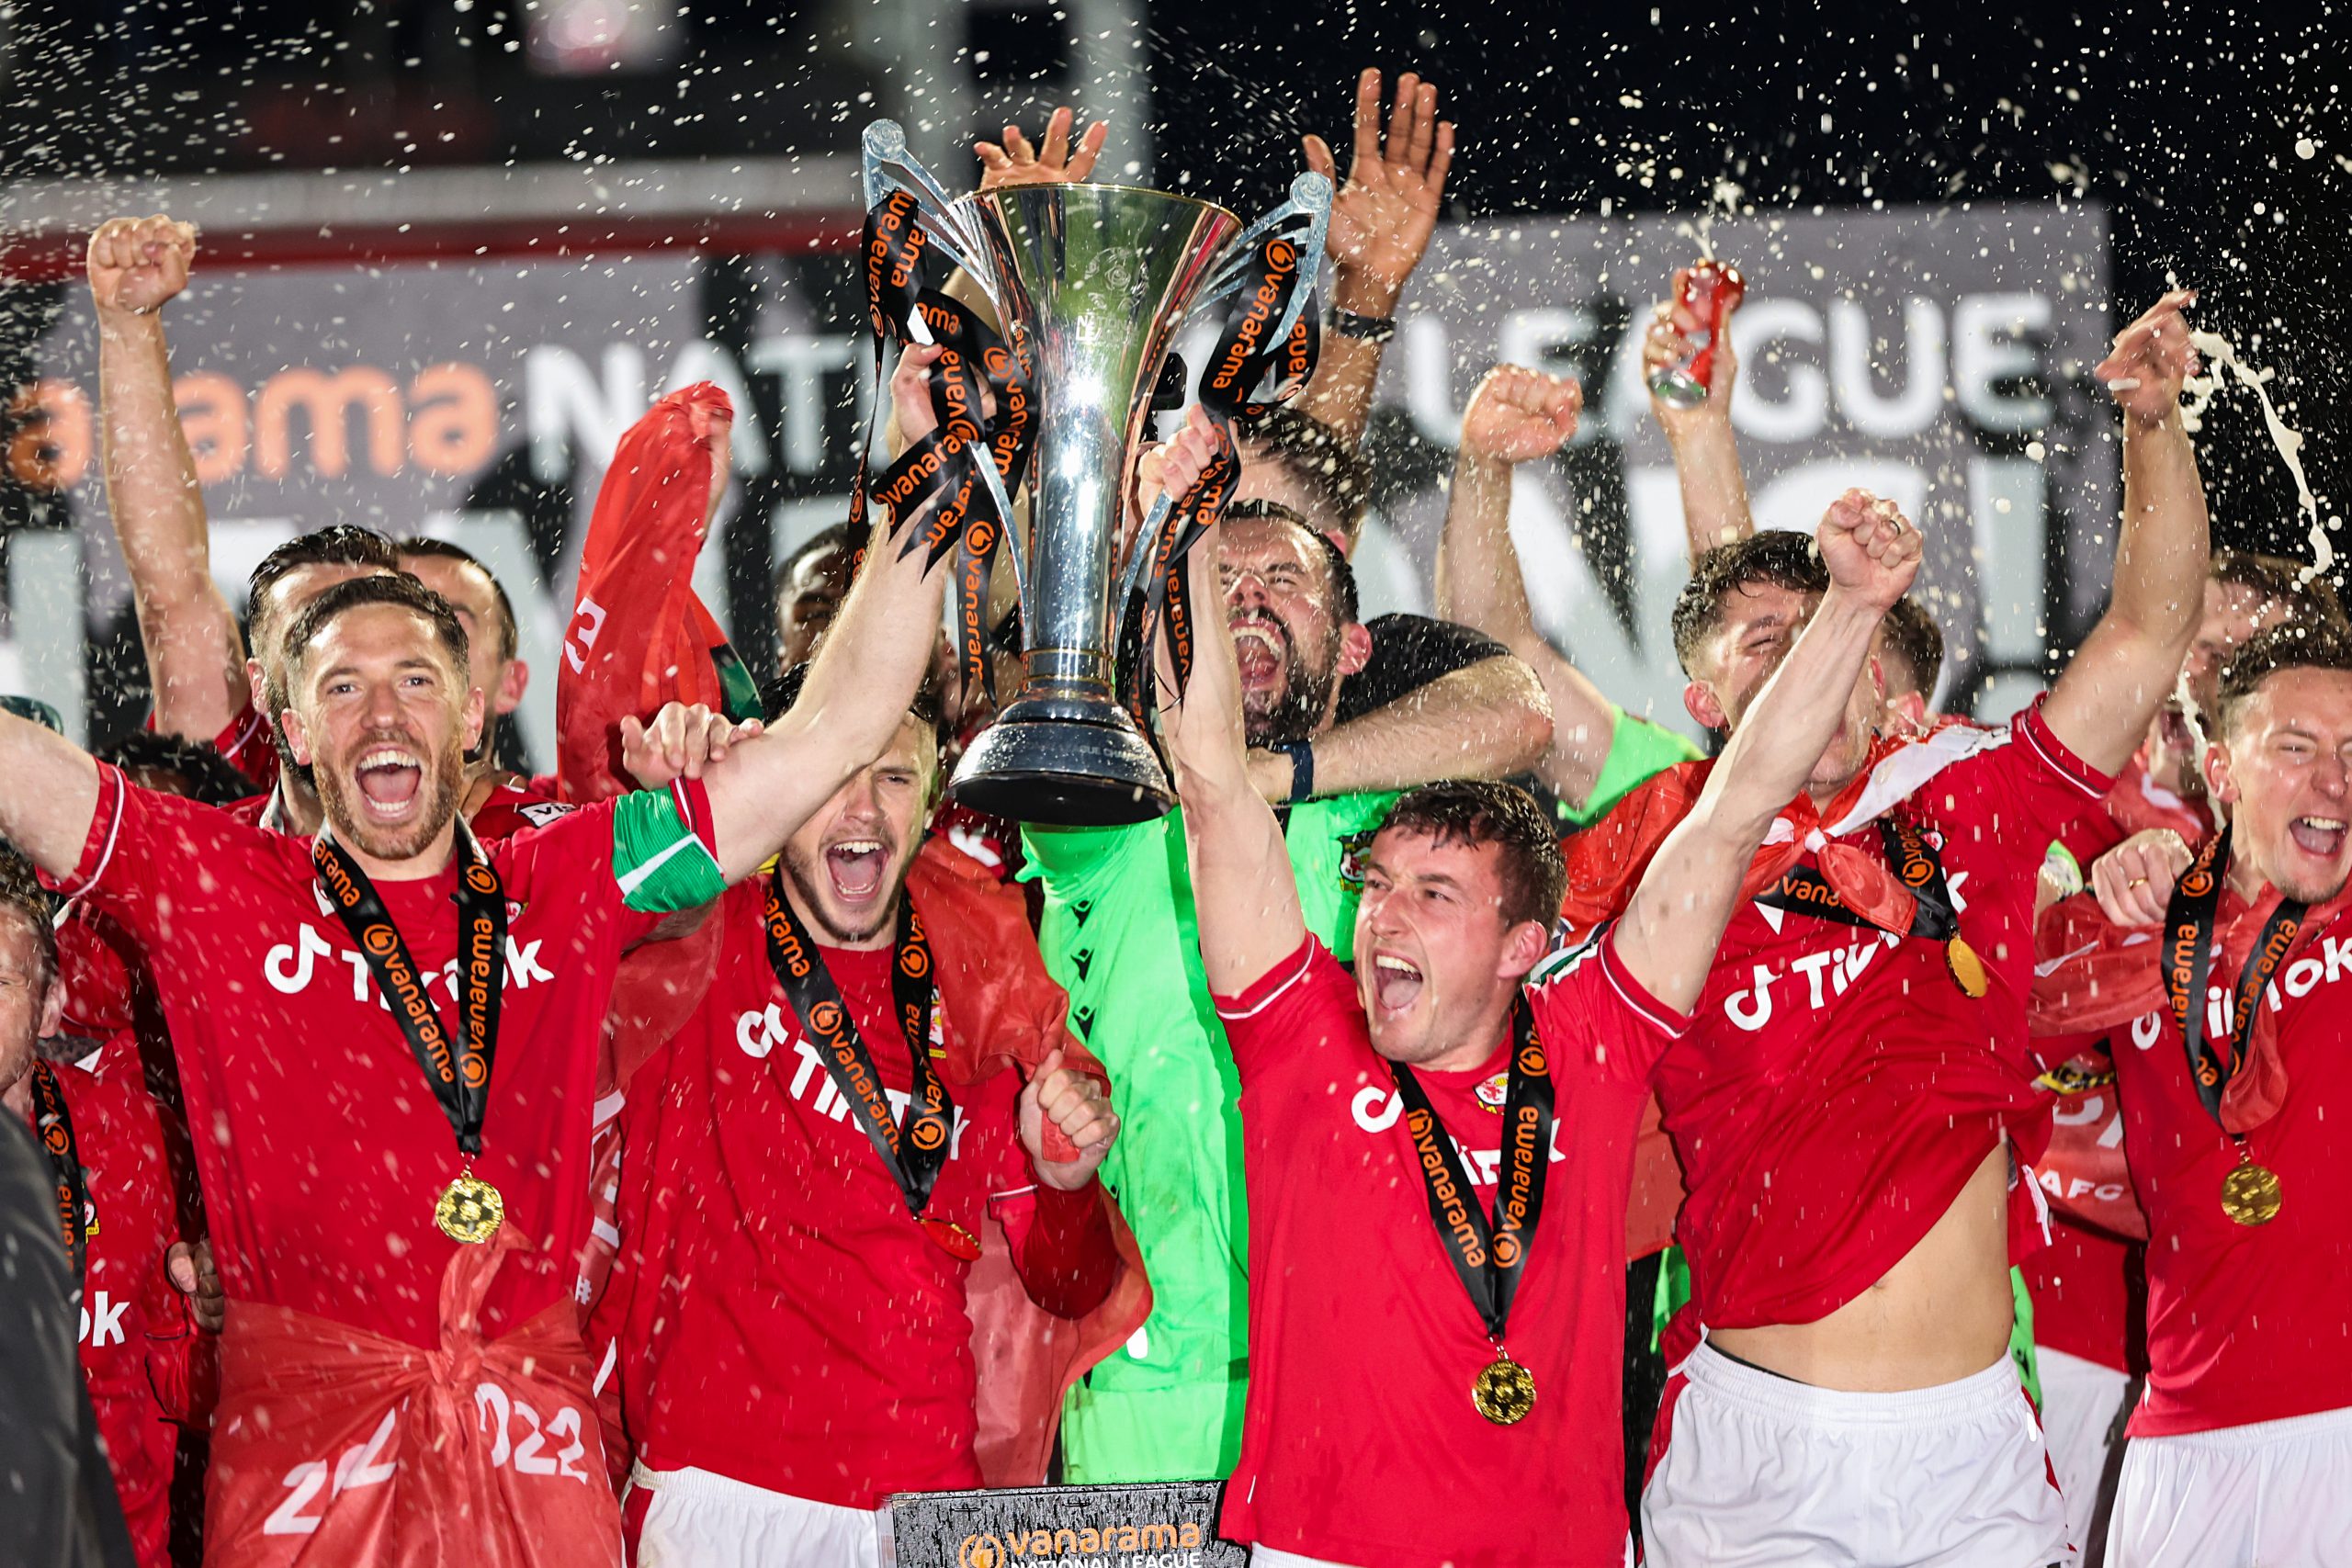 Ben Tozer and Luke Young of Wrexham lift the Vanarama National League Trophy as Wrexham celebrate promotion back to the English Football League during the Vanarama National League match between Wrexham and Boreham Wood at Racecourse Ground on April 22, 2023 in Wrexham, Wales. (Photo by Matthew Ashton - AMA/Getty Images)